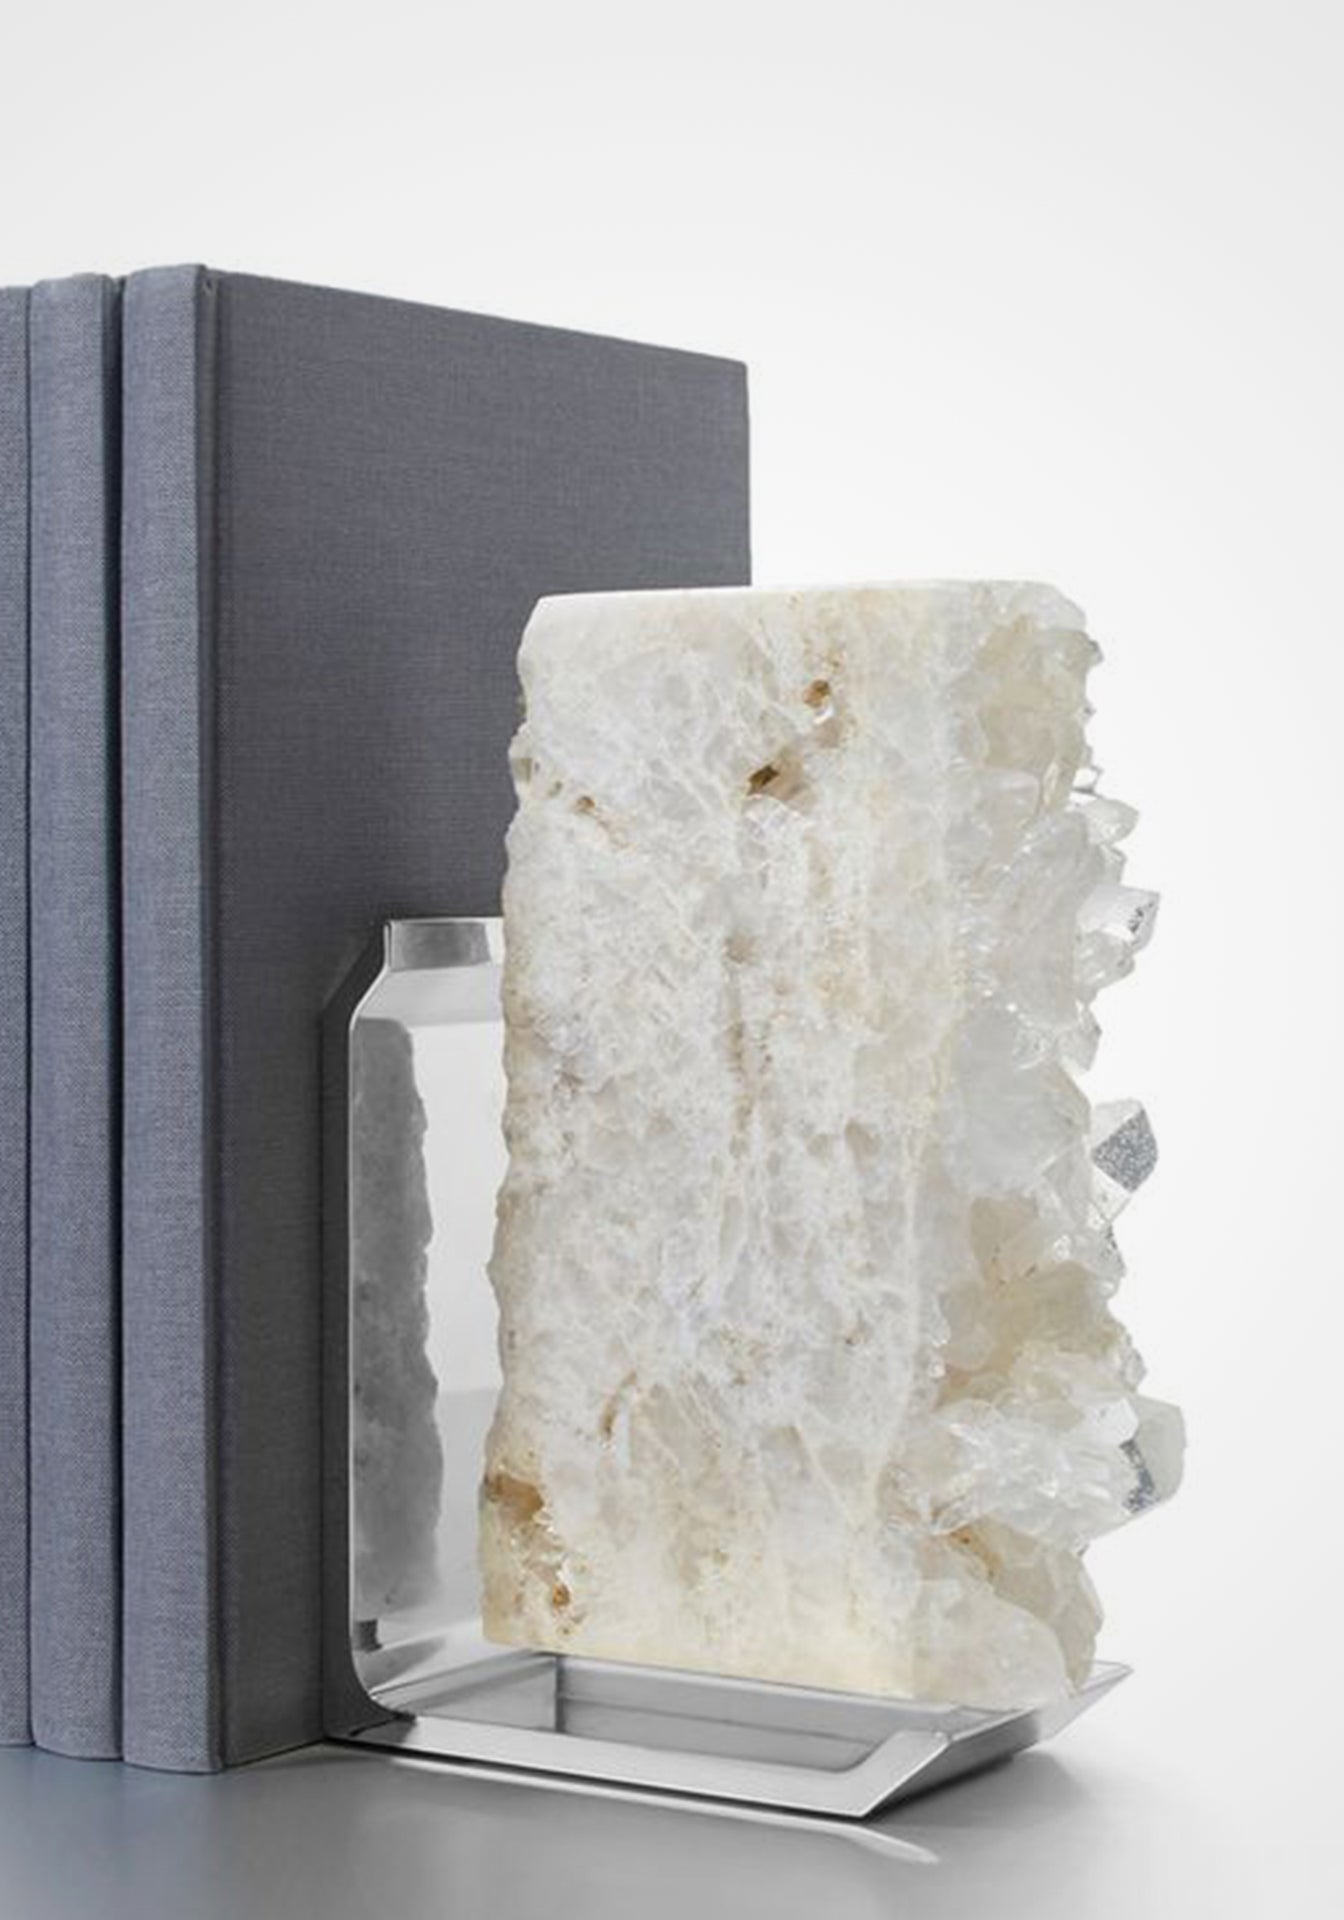 Fim Crystal Bookends